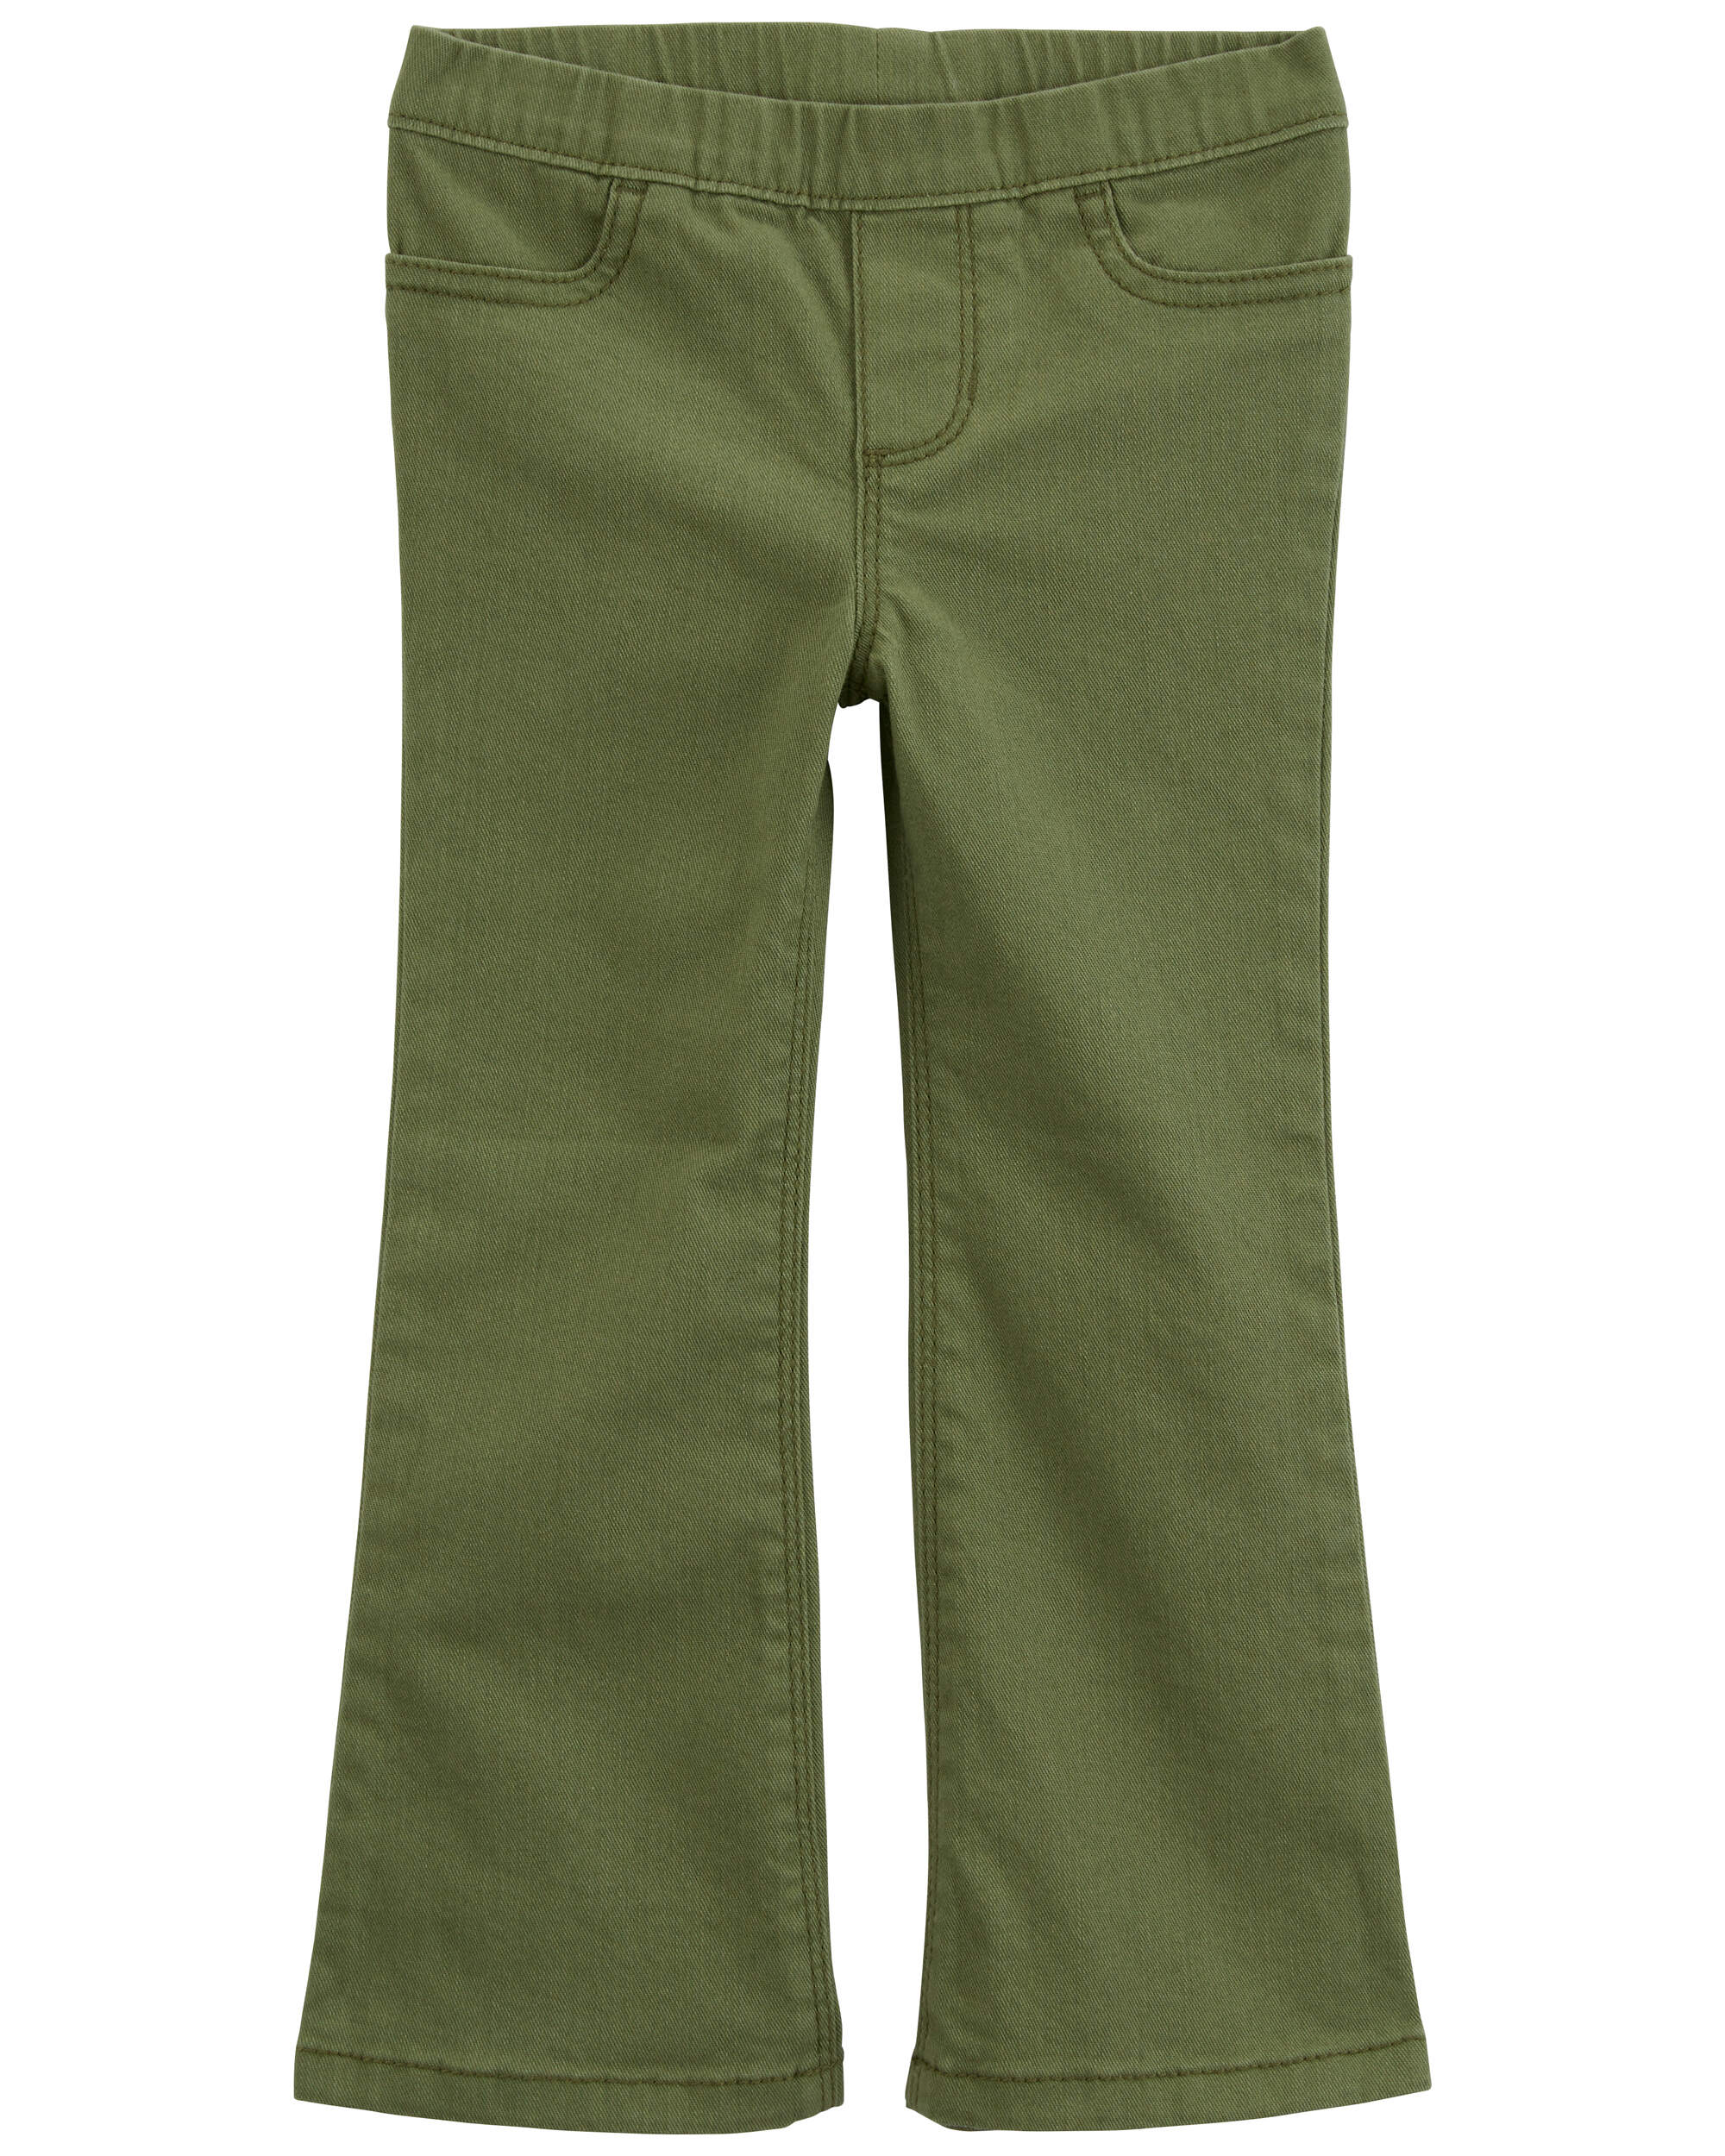 Toddler Flare Pull-On Twill Pants